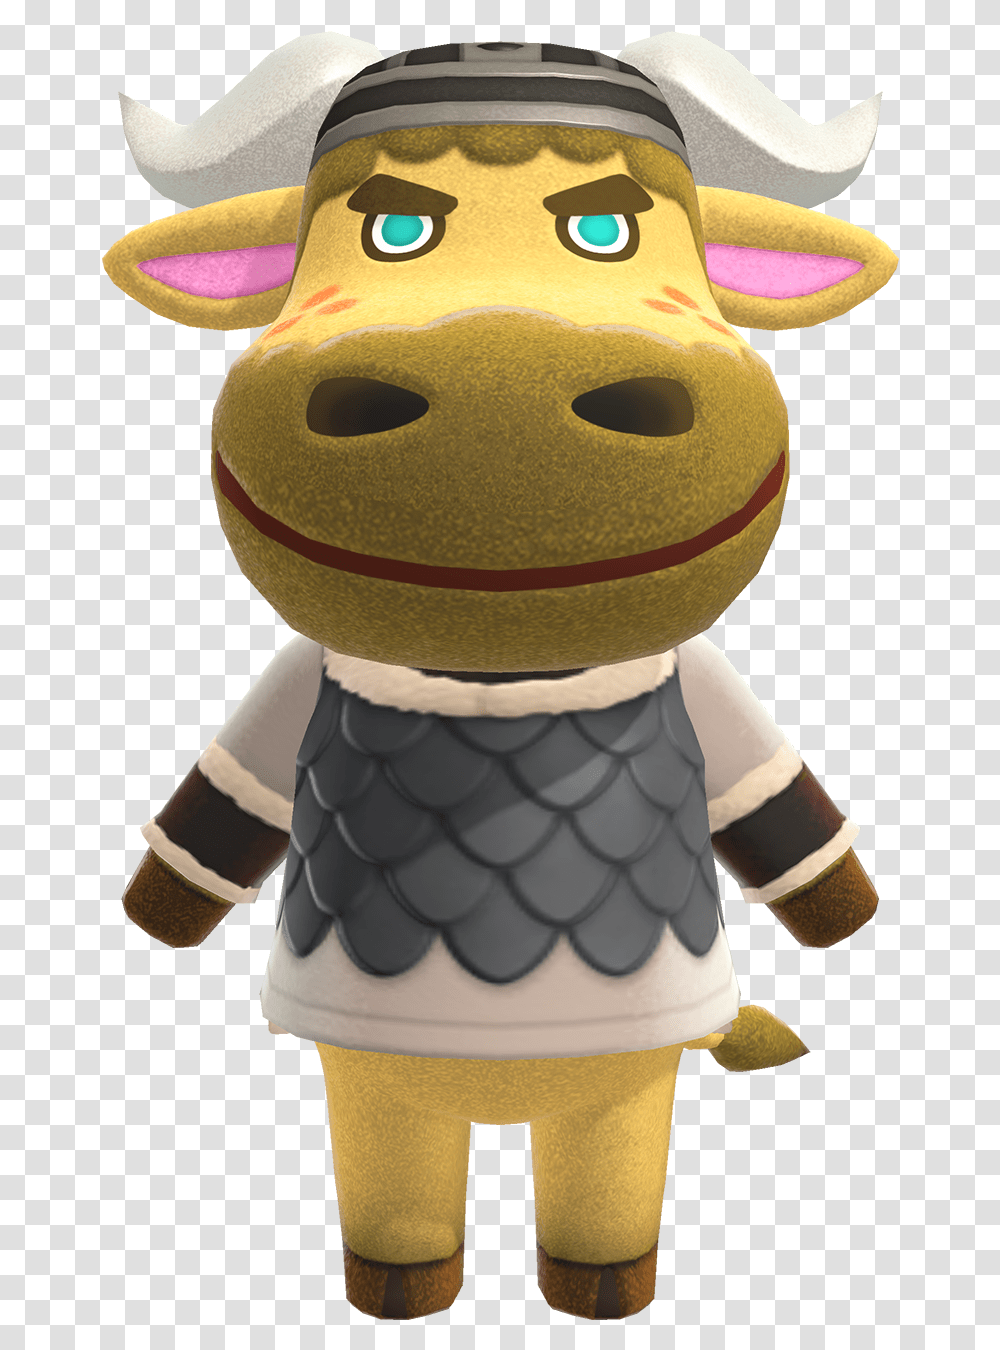 Vic Animal Crossing Wiki Nookipedia Animal Crossing New Horizons Vic, Toy, Plush, Figurine, Doll Transparent Png